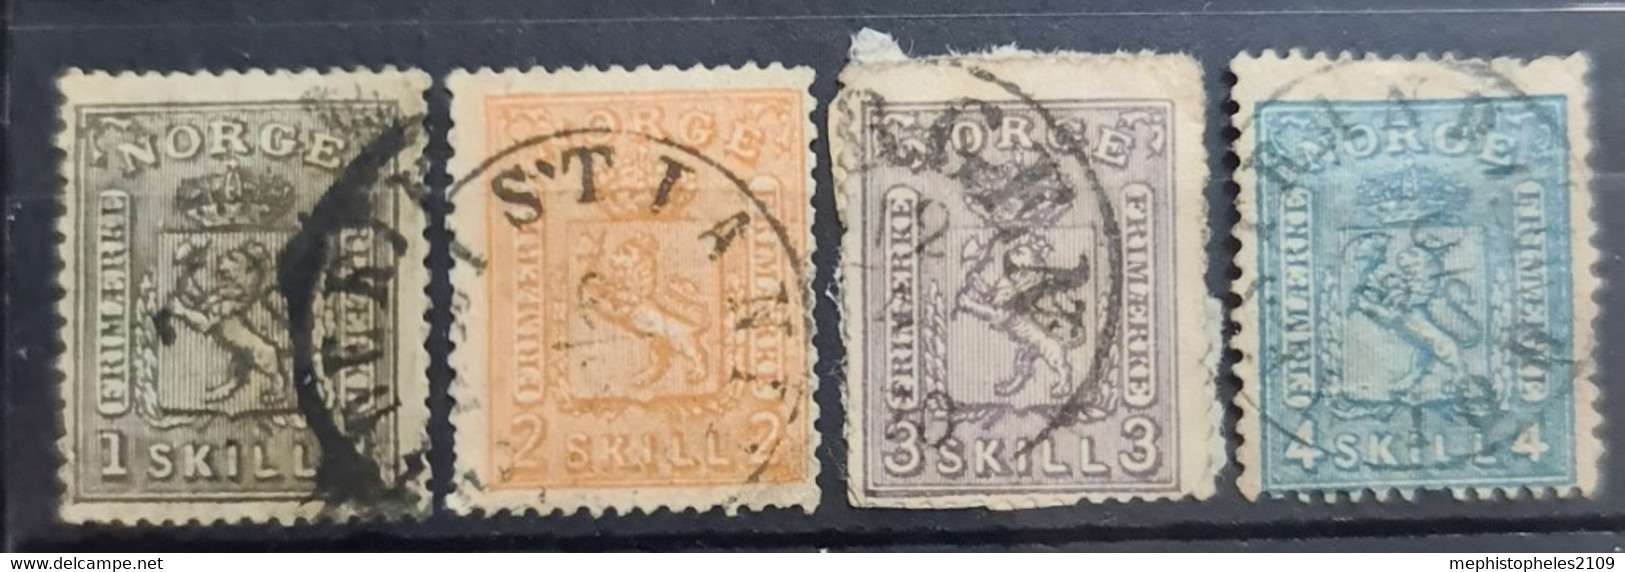 NORWAY 1867/68 - Canceled - Sc# 11, 12, 13, 14 - Used Stamps